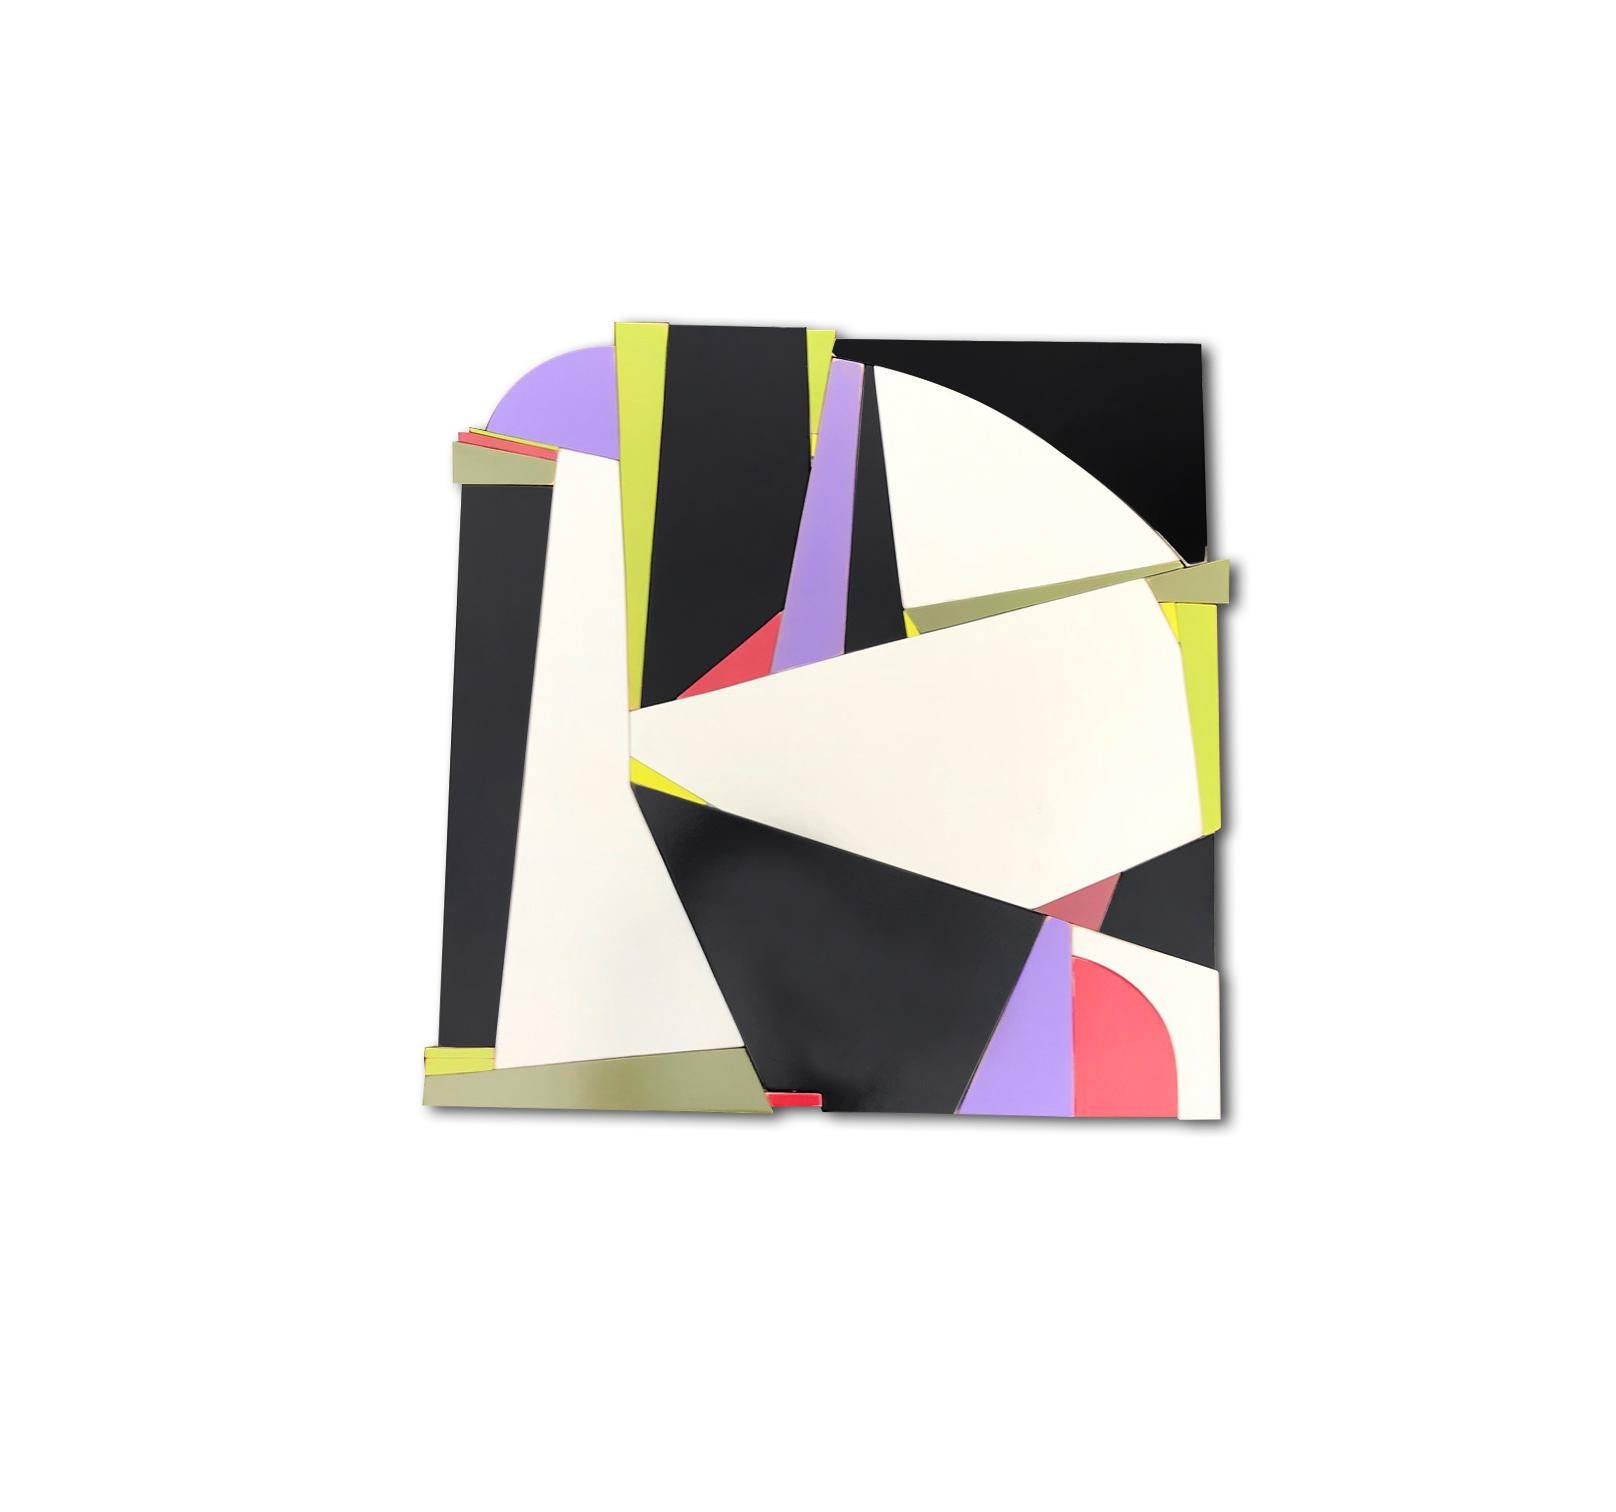 Martini (modern black and white wall sculpture abstract geometric wood design) - Sculpture by Scott Troxel